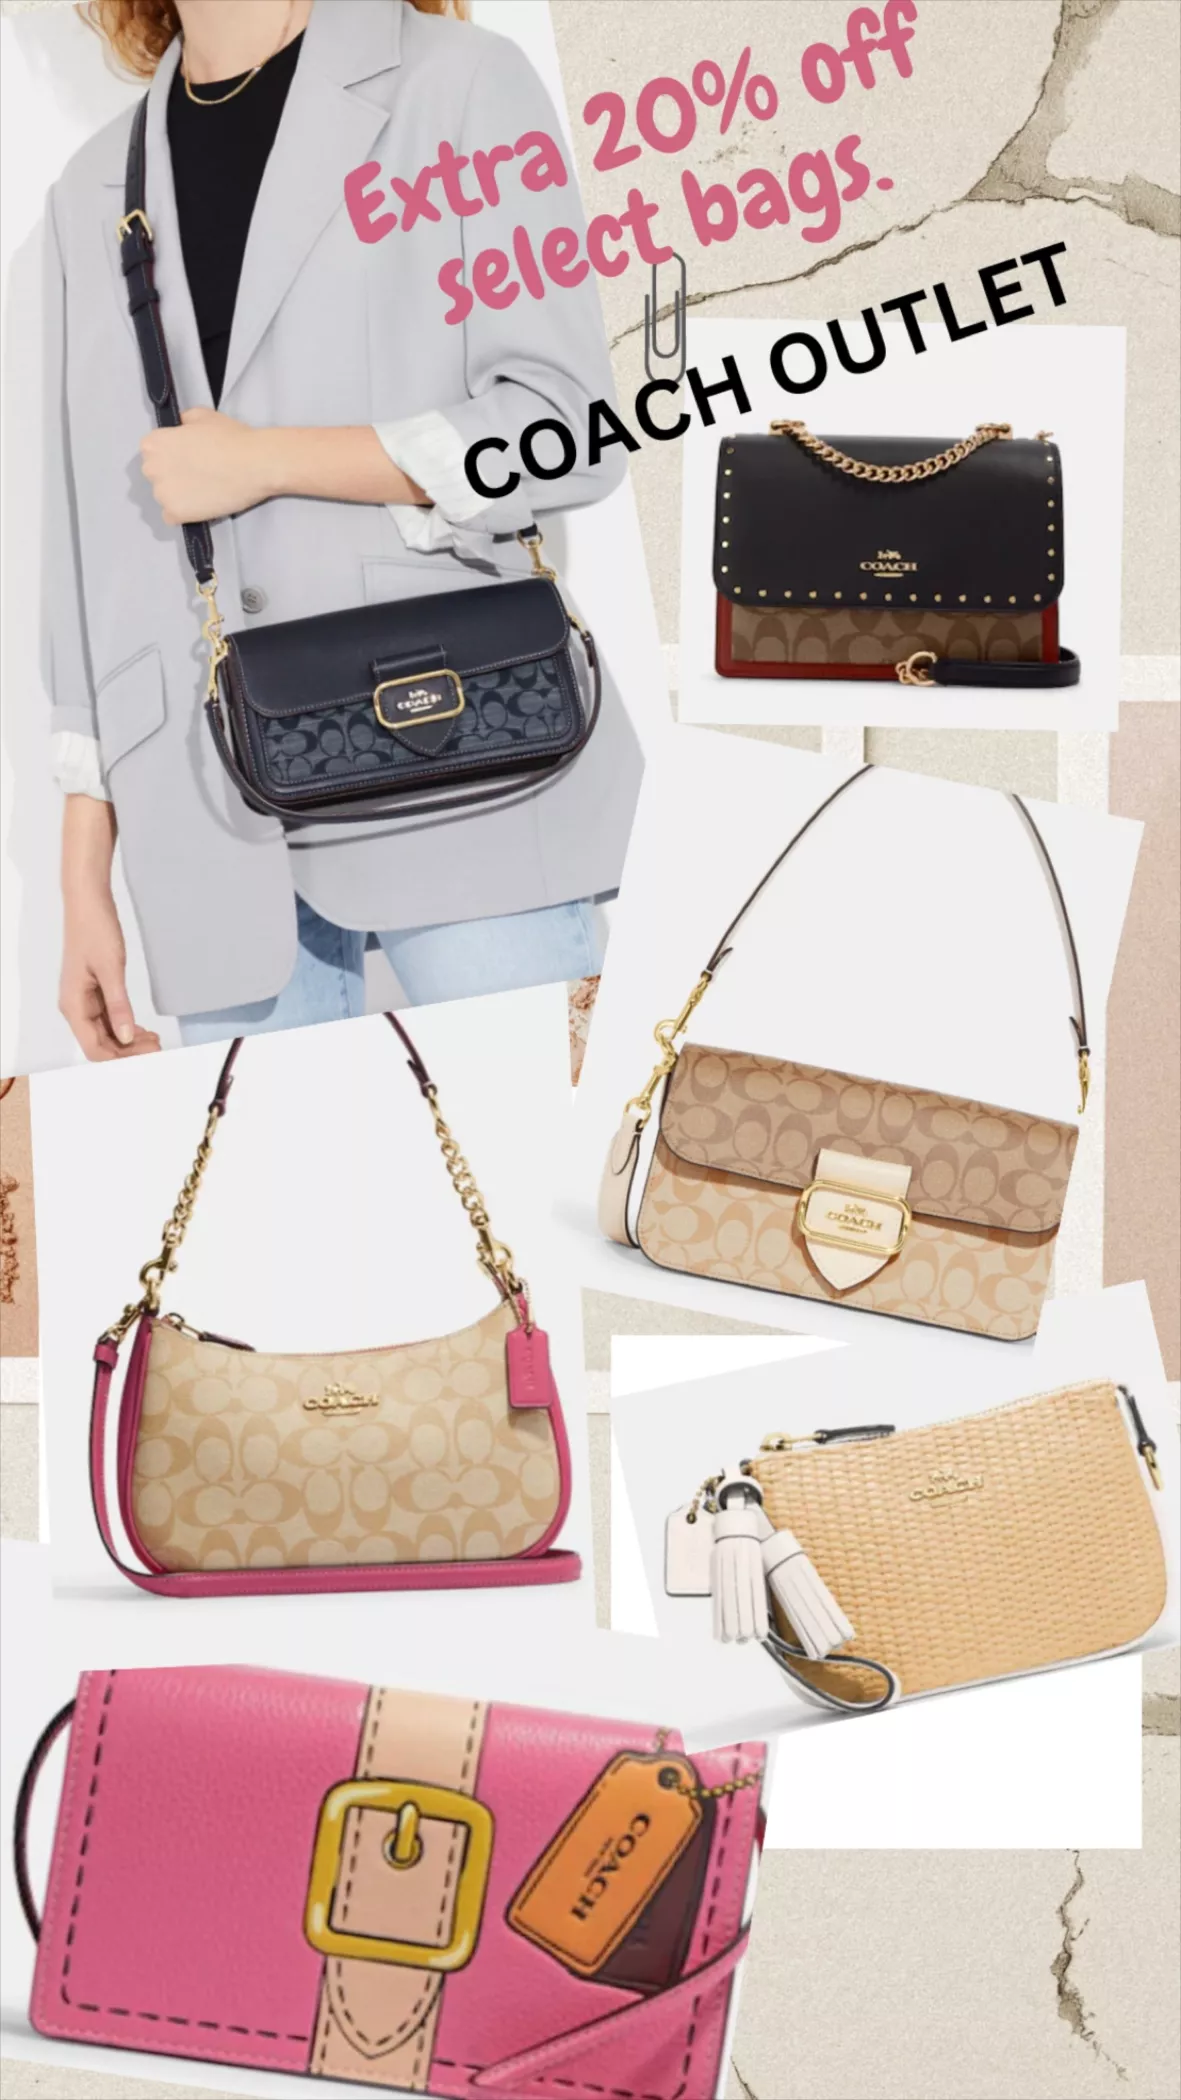 Coach+Outlet+Marlie+Tote+In+Signature+Canvas+-+Light+Khaki for